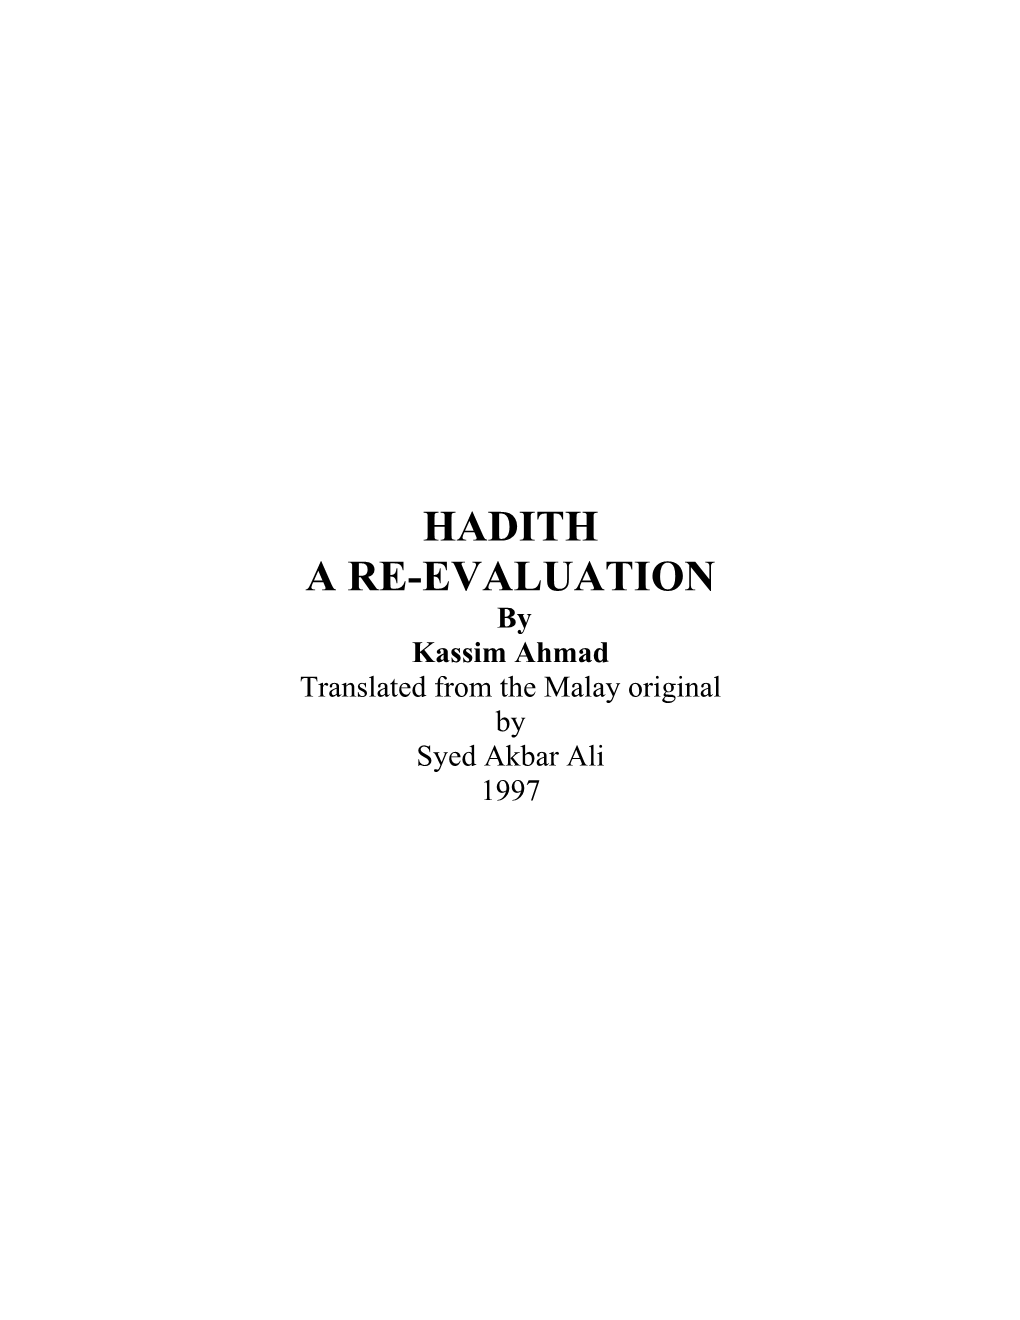 HADITH a RE-EVALUATION by Kassim Ahmad Translated from the Malay Original by Syed Akbar Ali 1997